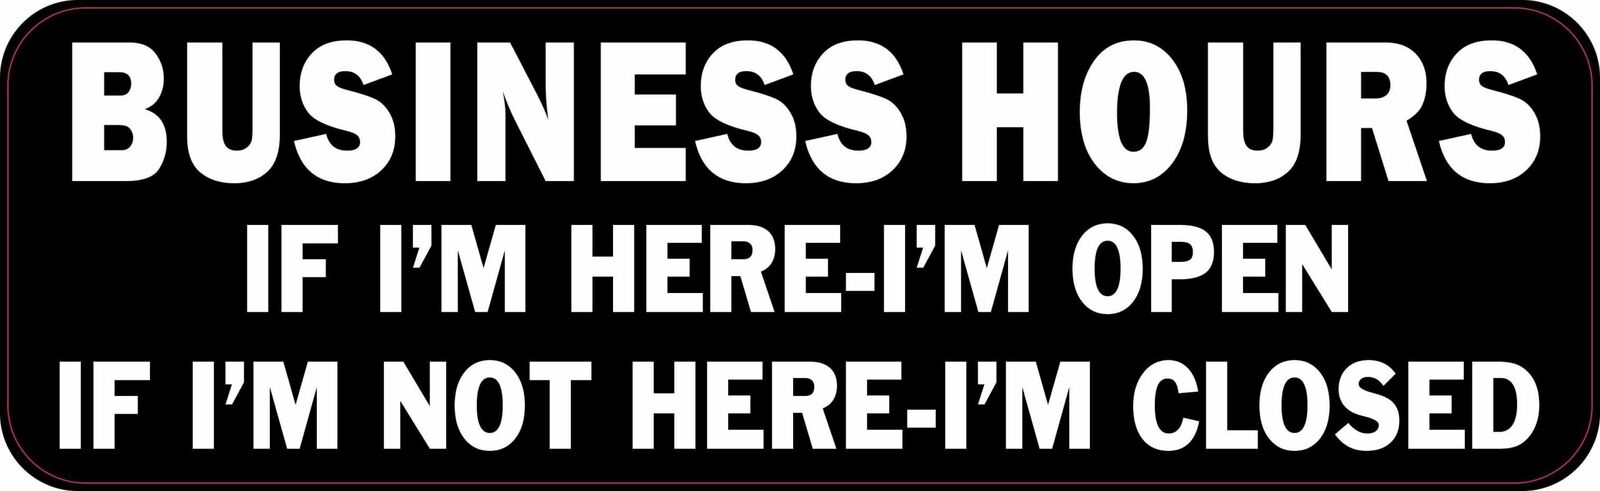 10in x 3in Business Hours Open If Im Here Magnet Car Truck Vehicle Magnetic Sign